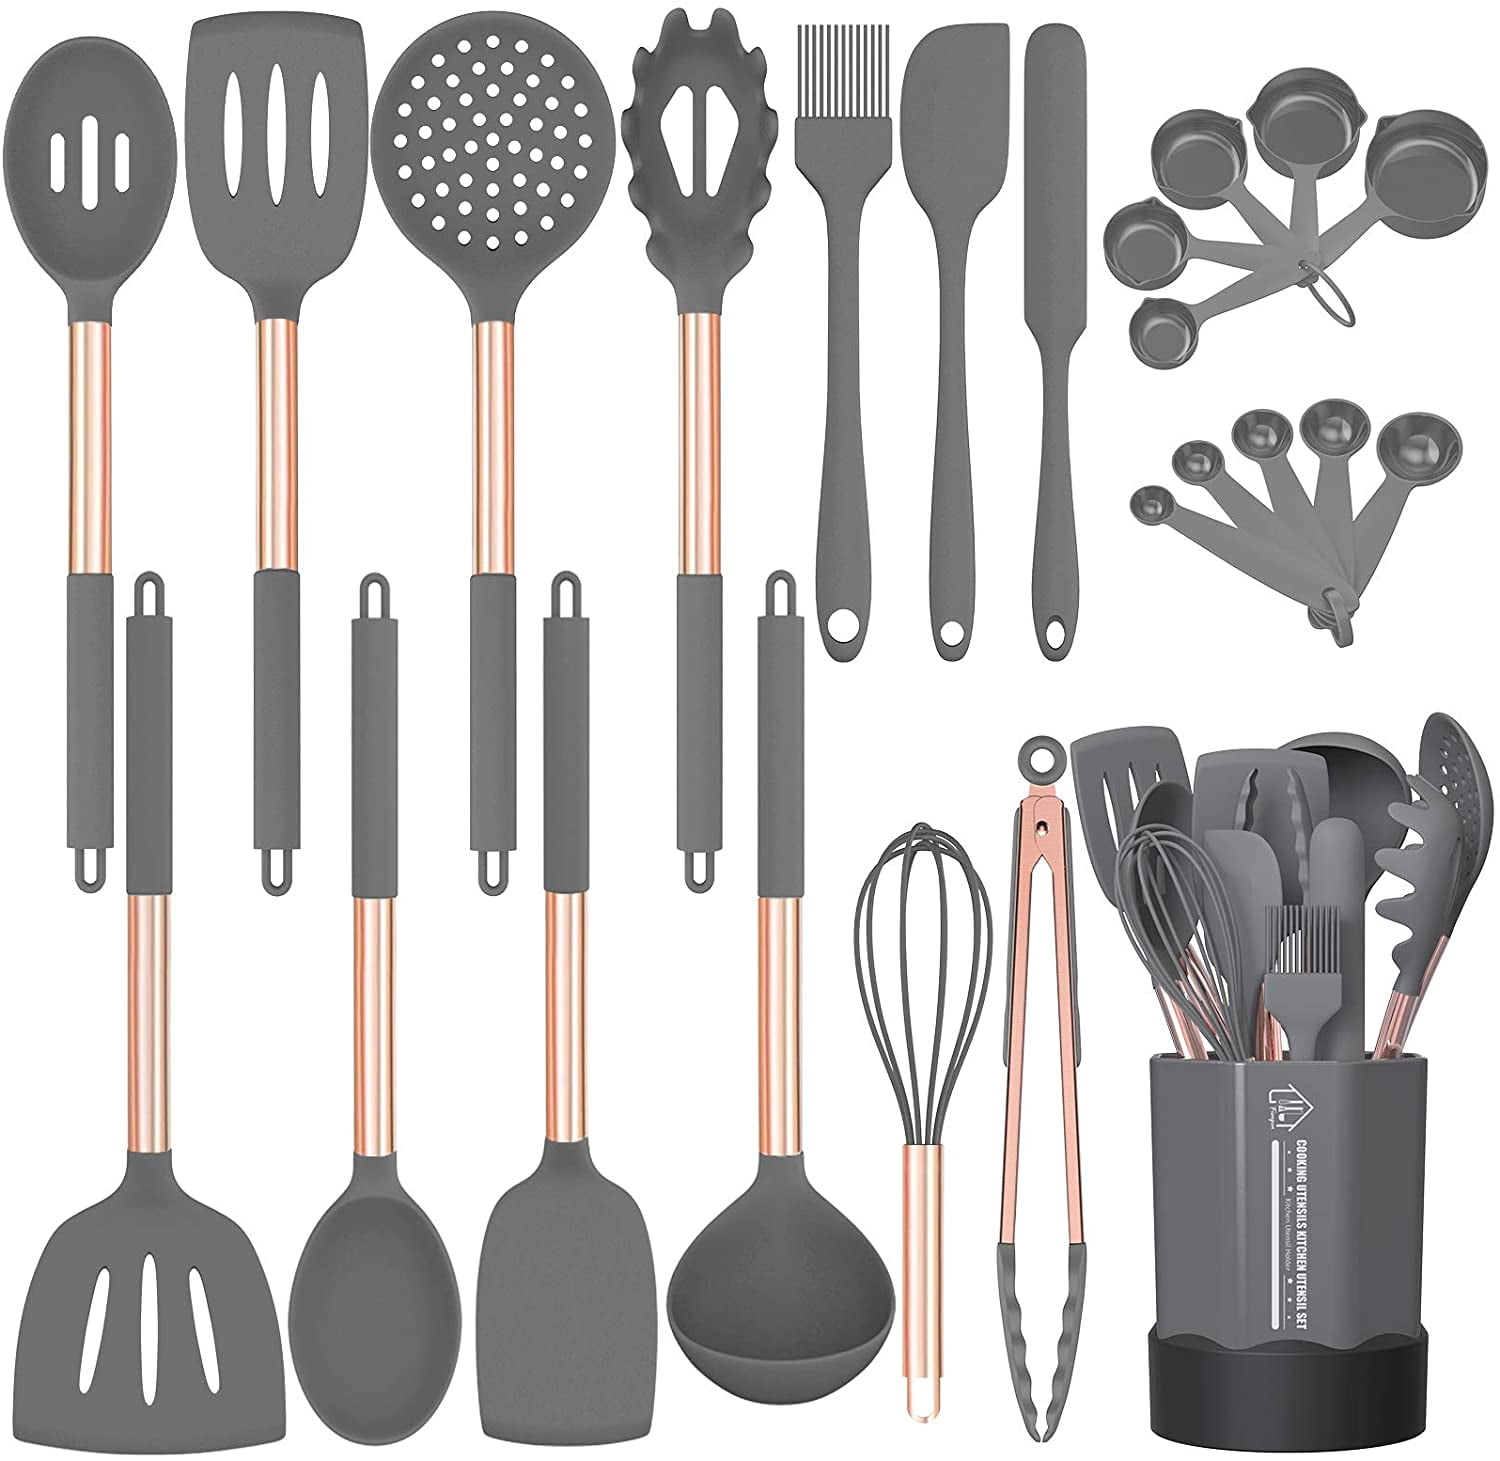 DYD Kitchen Utensils Set Silicone,15 Pcs Kitchen Utensil Premium Quality Cooking Utensil Set,Non-stick Heat Resistant Silicone,Cookware with Stainless Steel Handle,Blue …